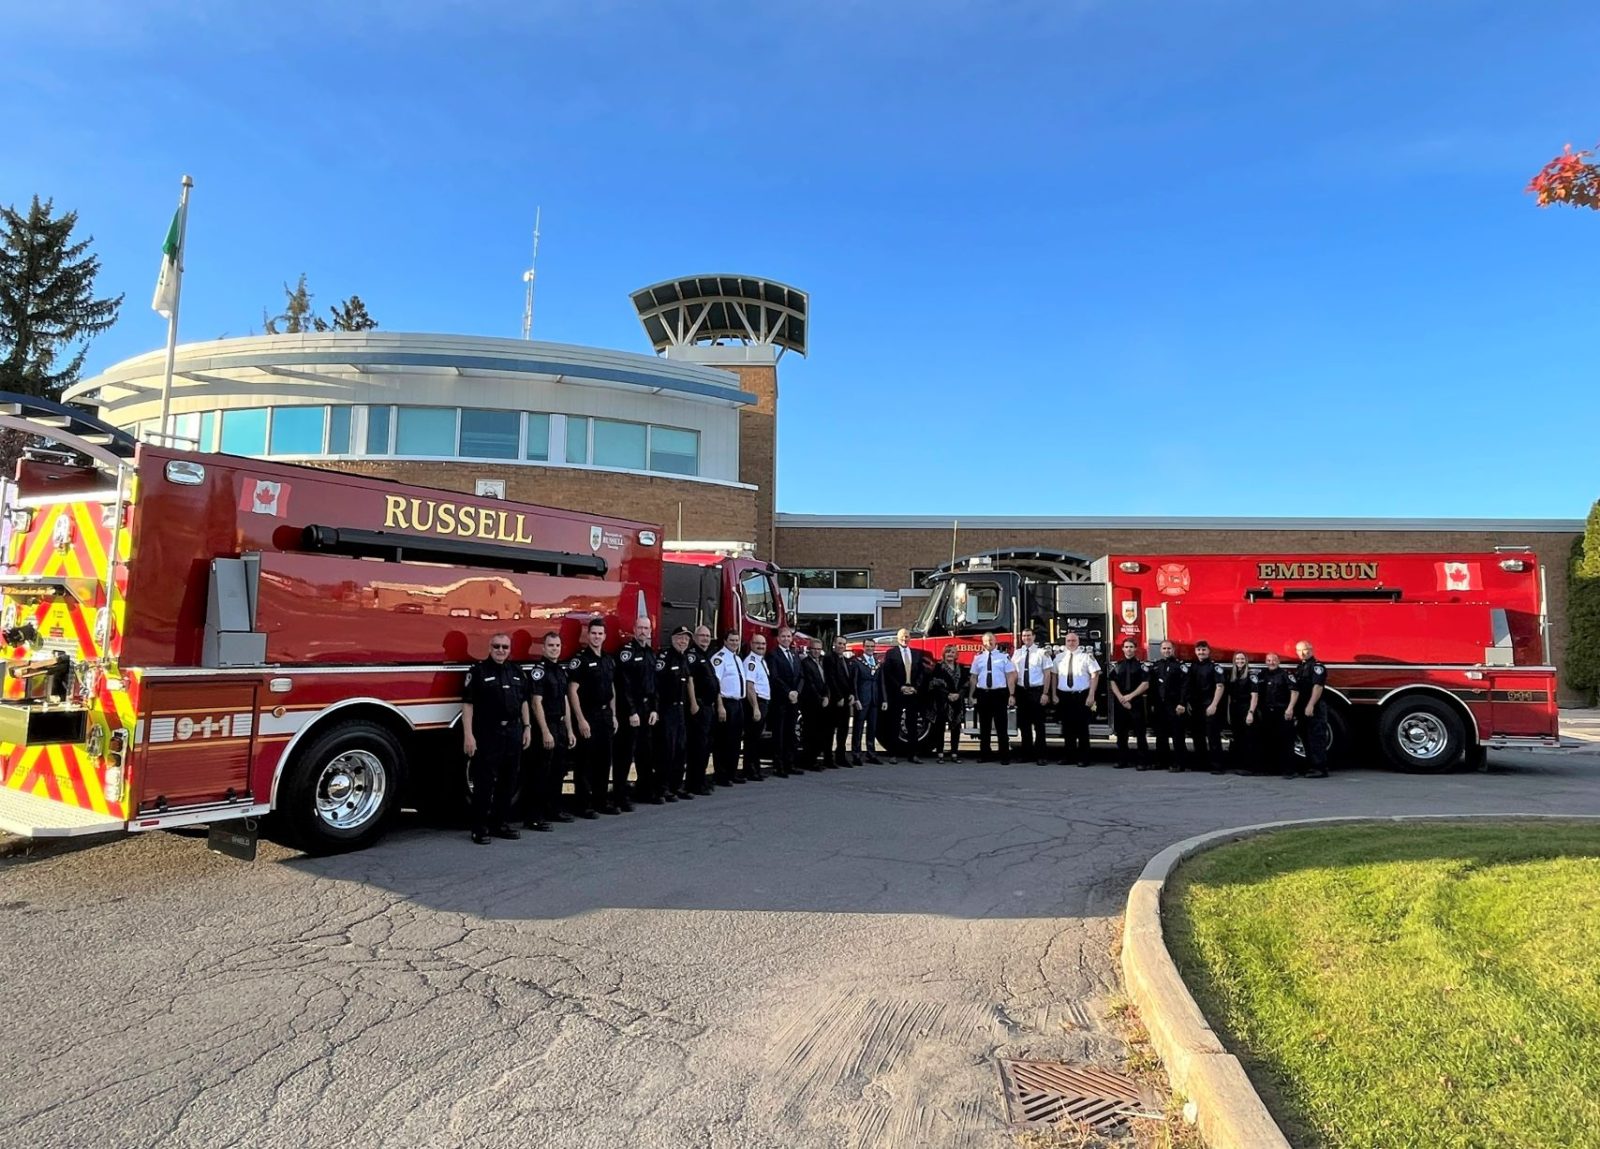 Russell Township has two new firetrucks